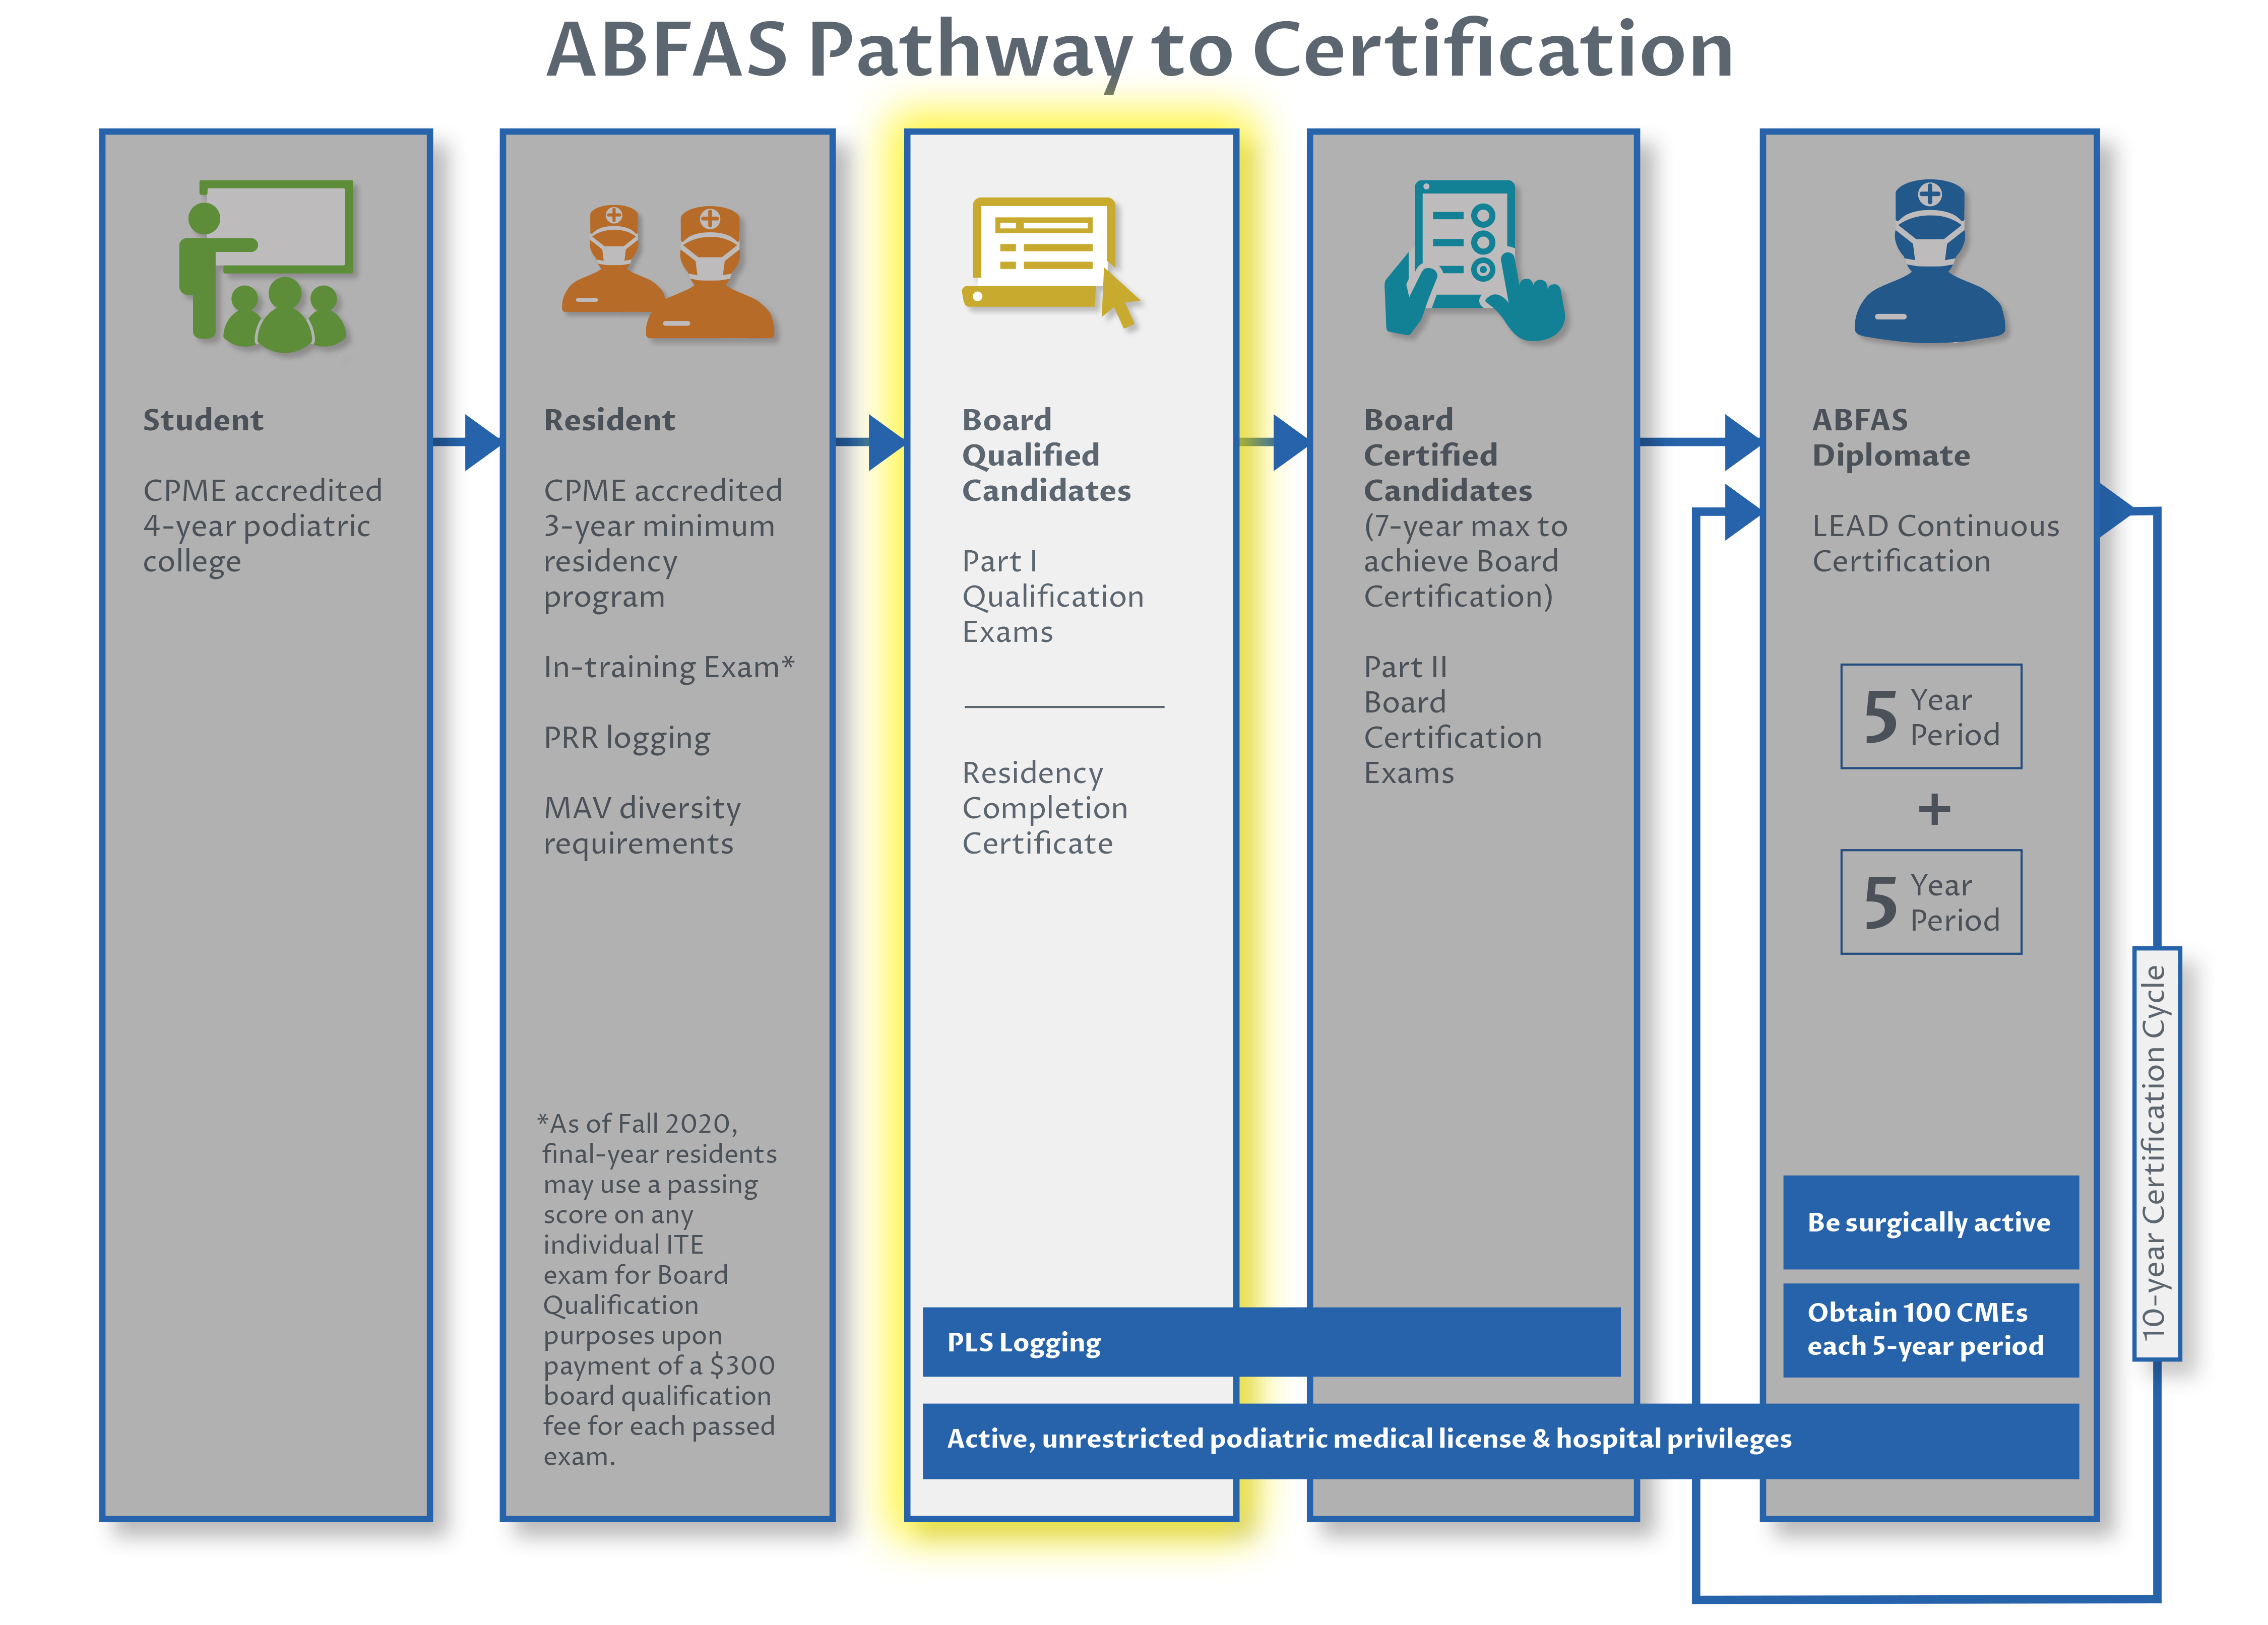 ABFAS Pathway to Certification for Board Qualified candidates